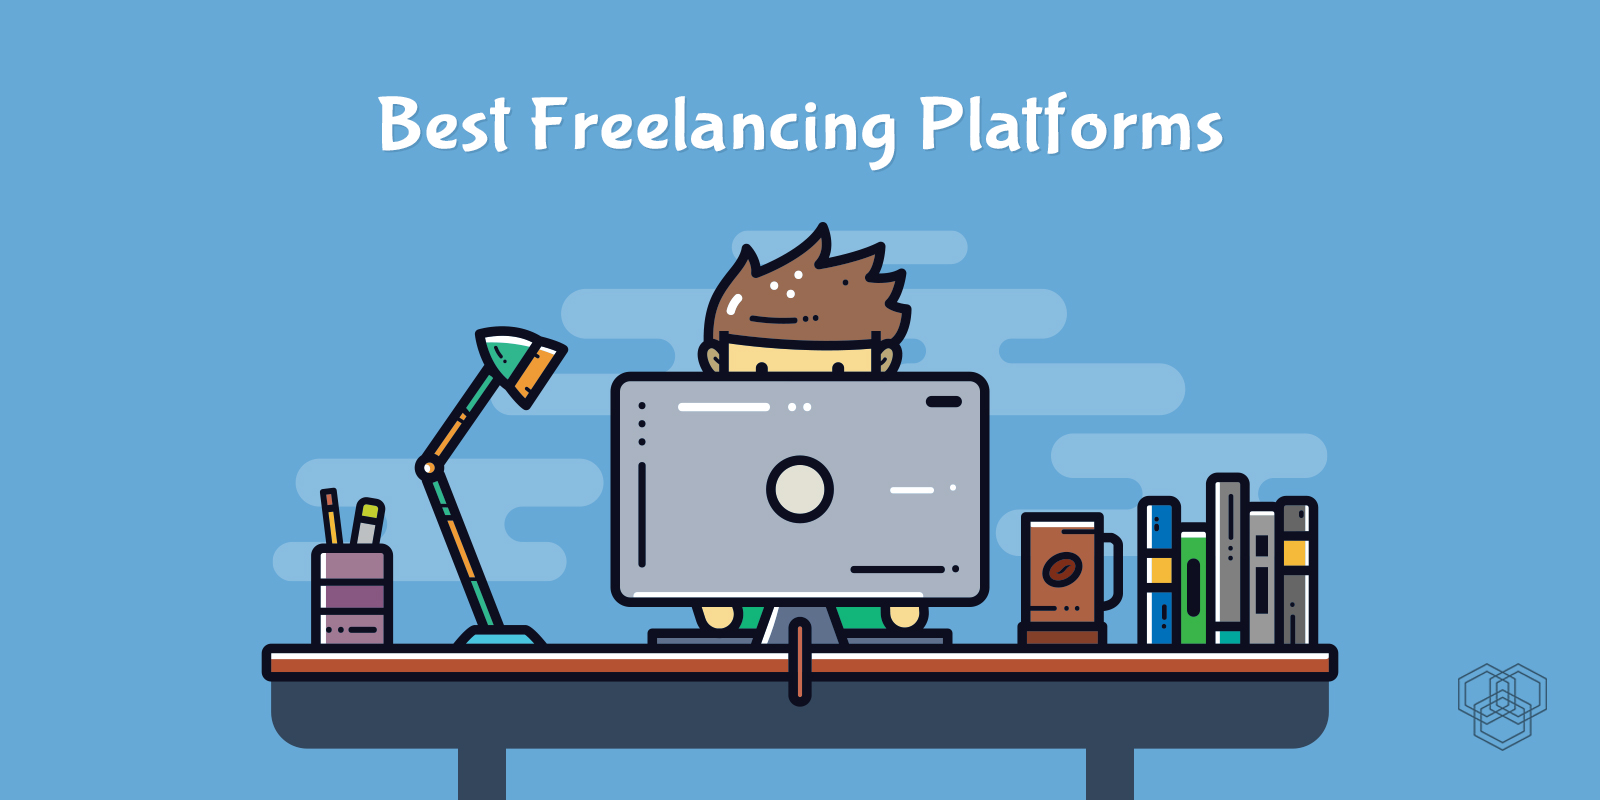 Which Platform Is Best For Freelancing